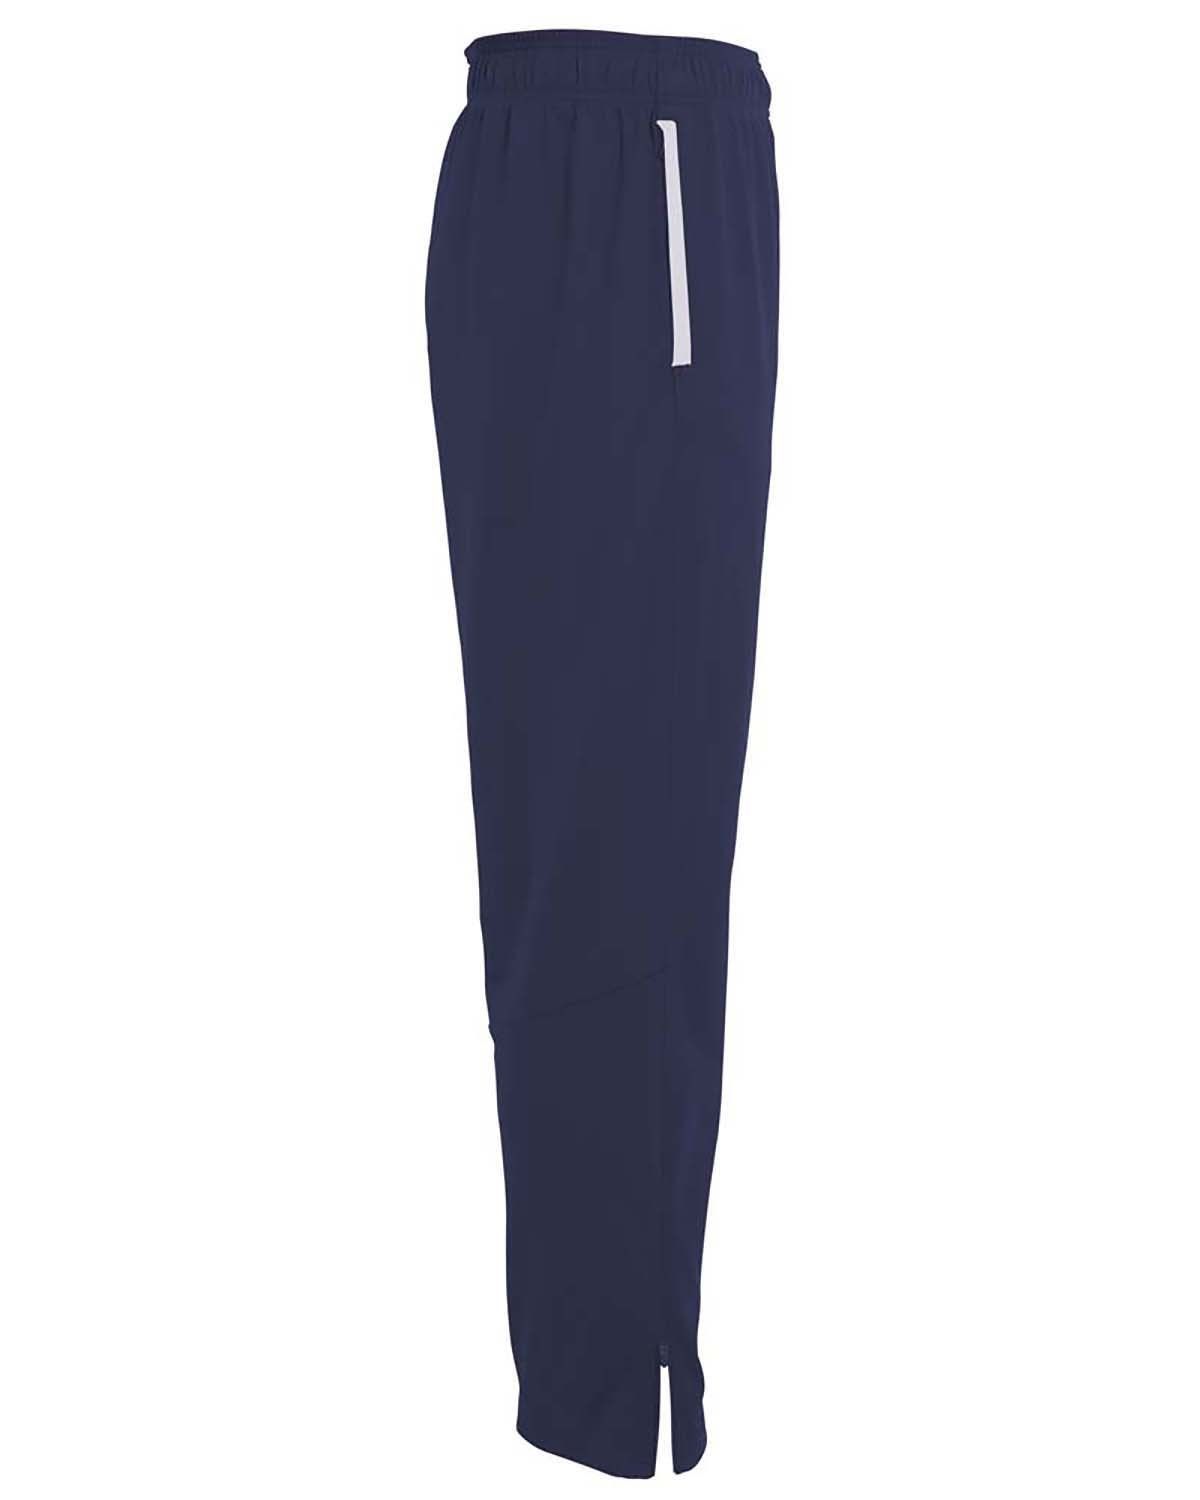 'A4 NB6199 Youth League Warm Up Pant'